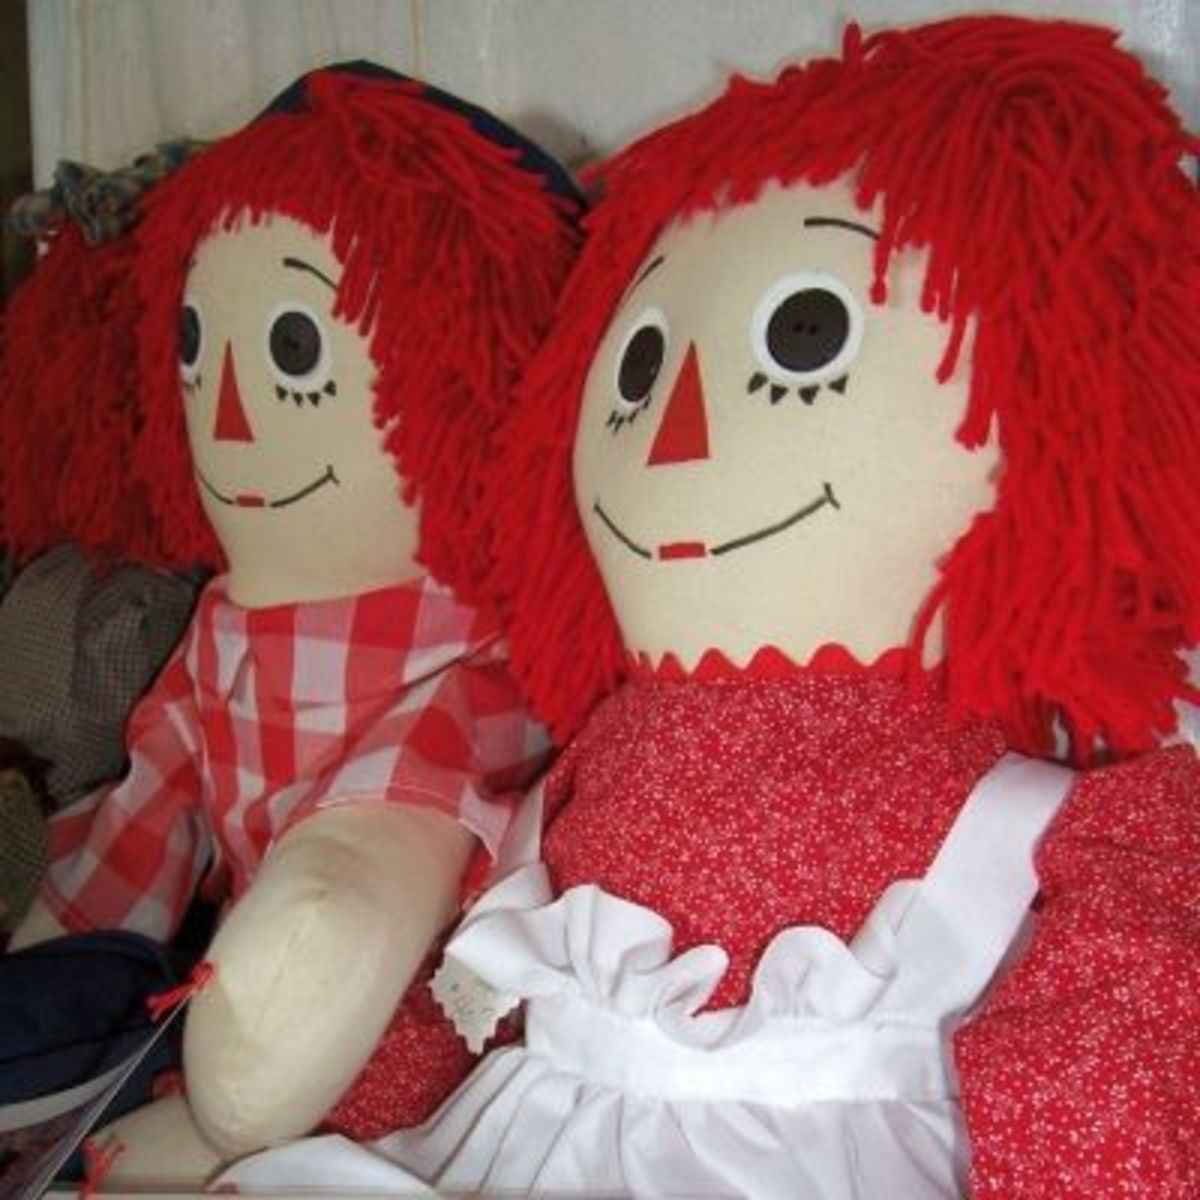 Some people just collect cloth dolls like Raggety Ann and Andy               Photo: Stock.XCHNG